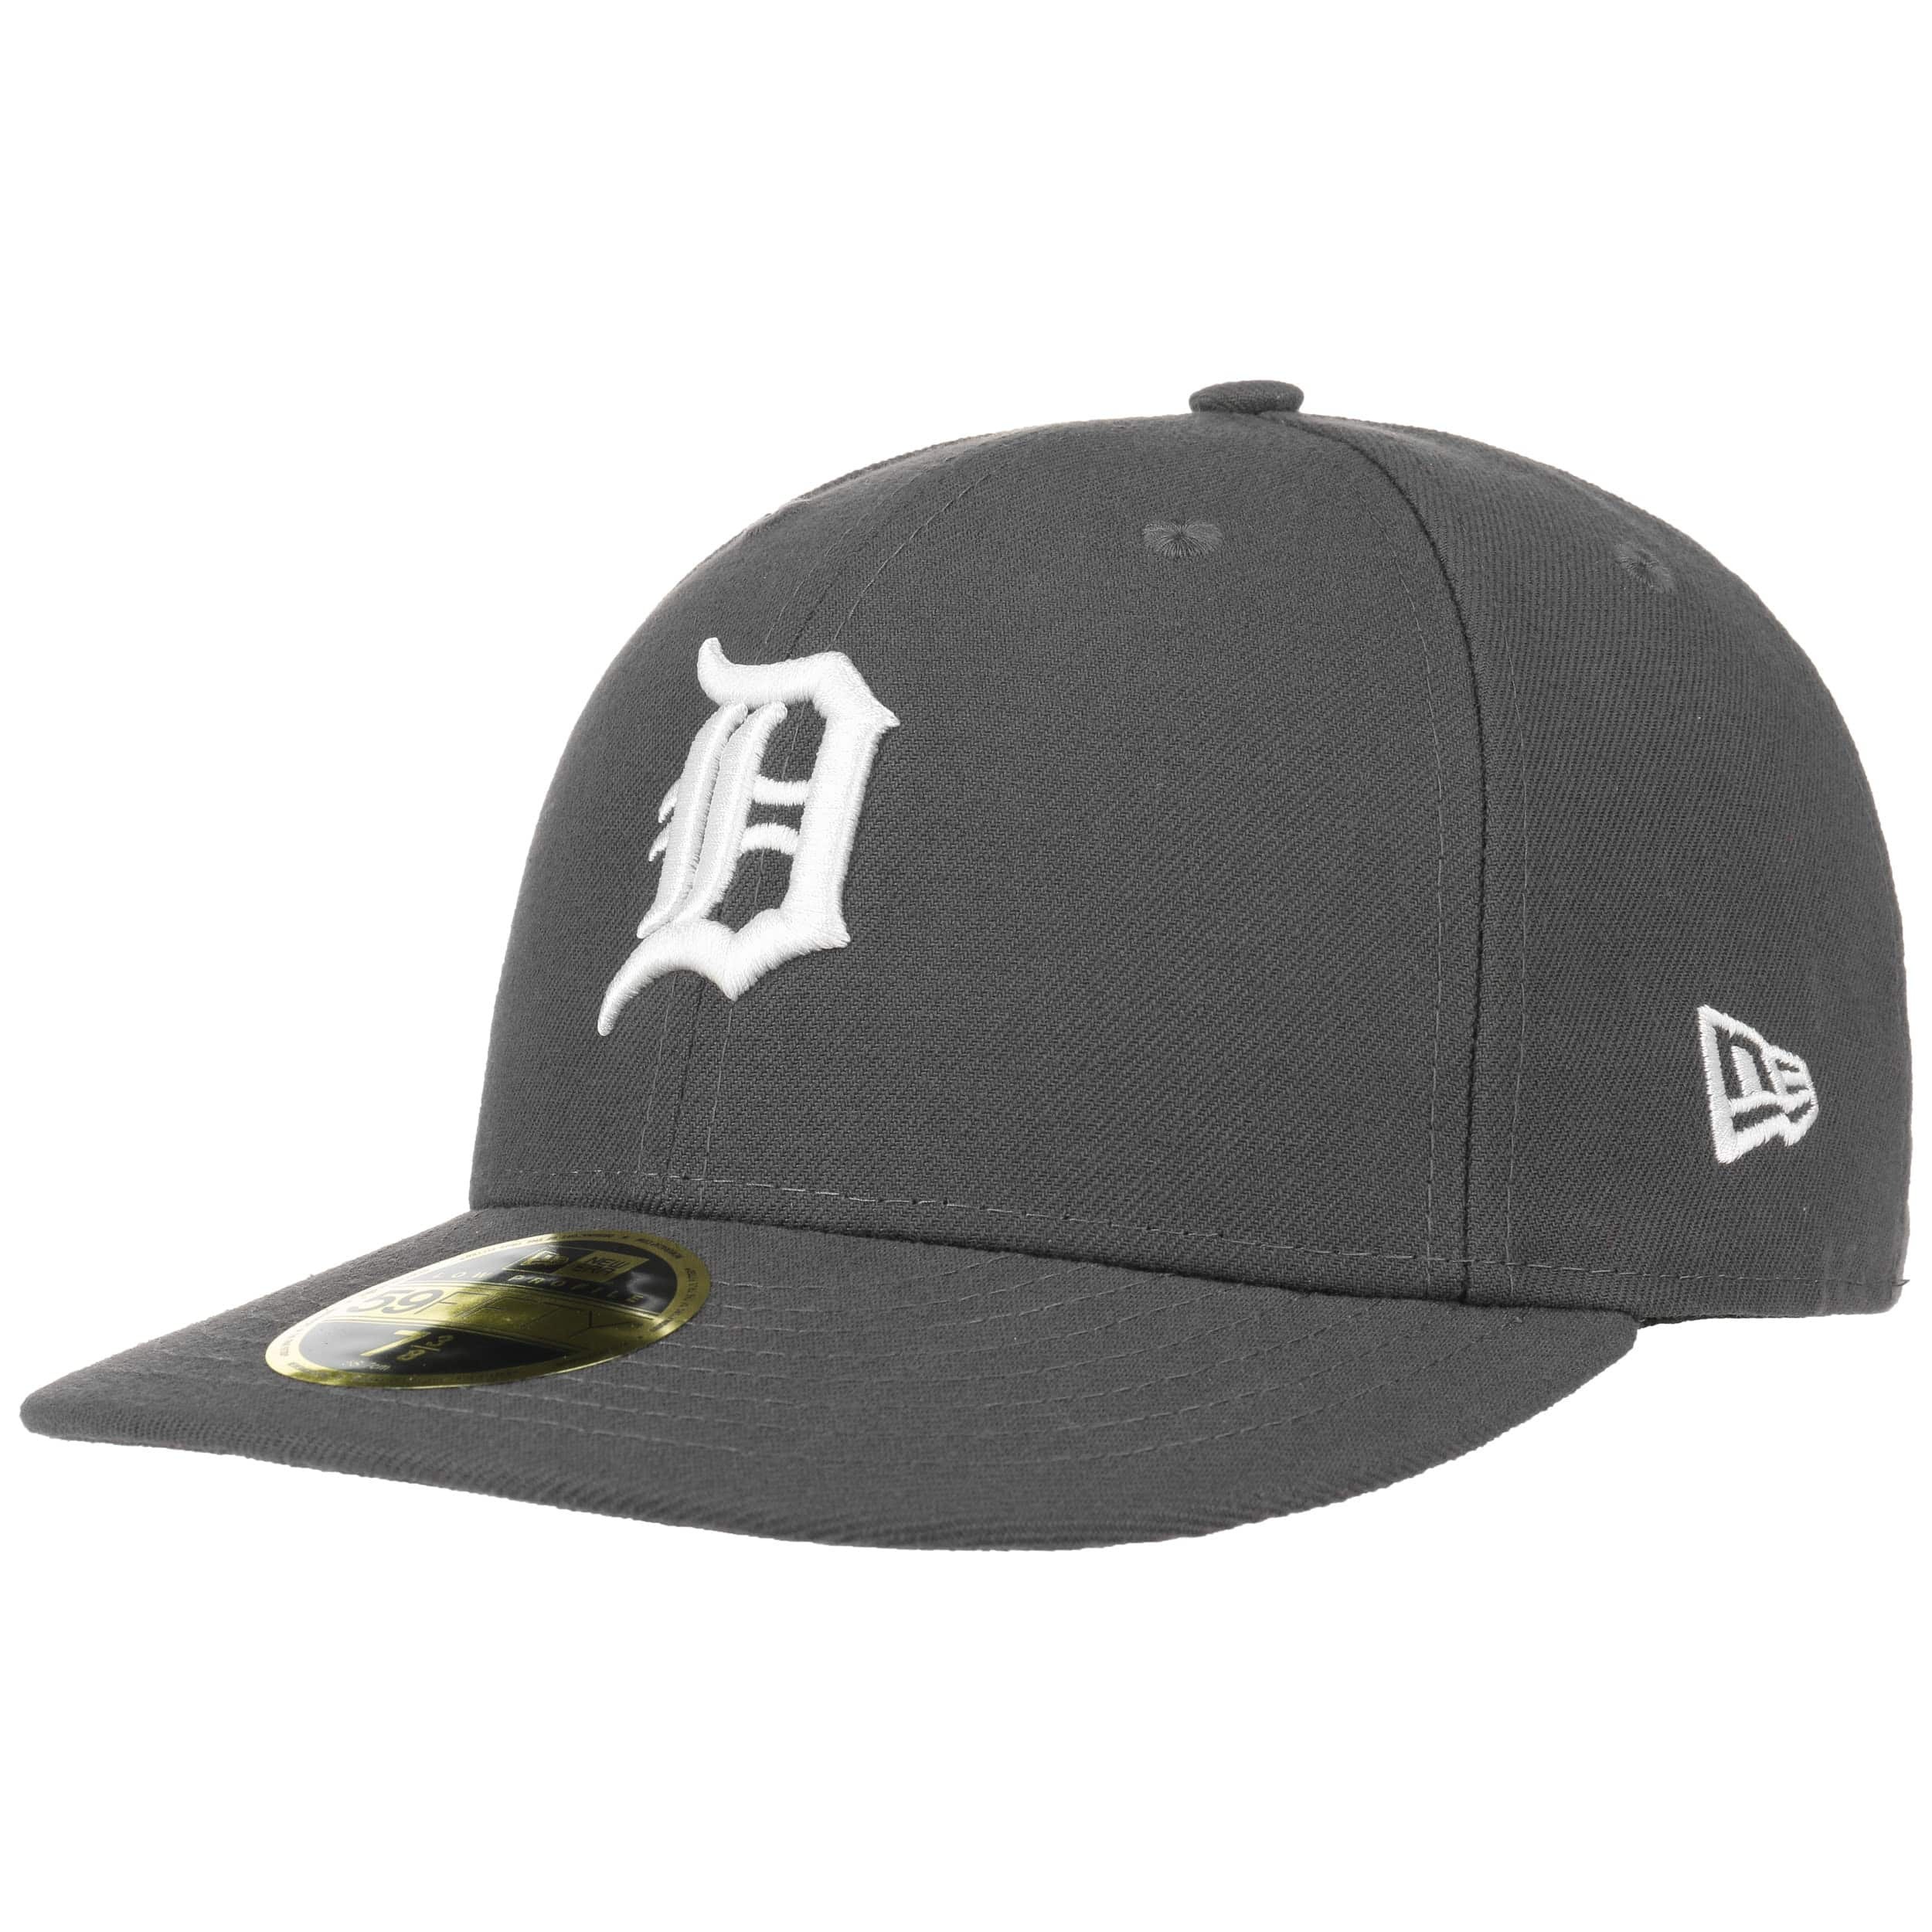 59Fifty Low Profile Tigers Cap by New Era